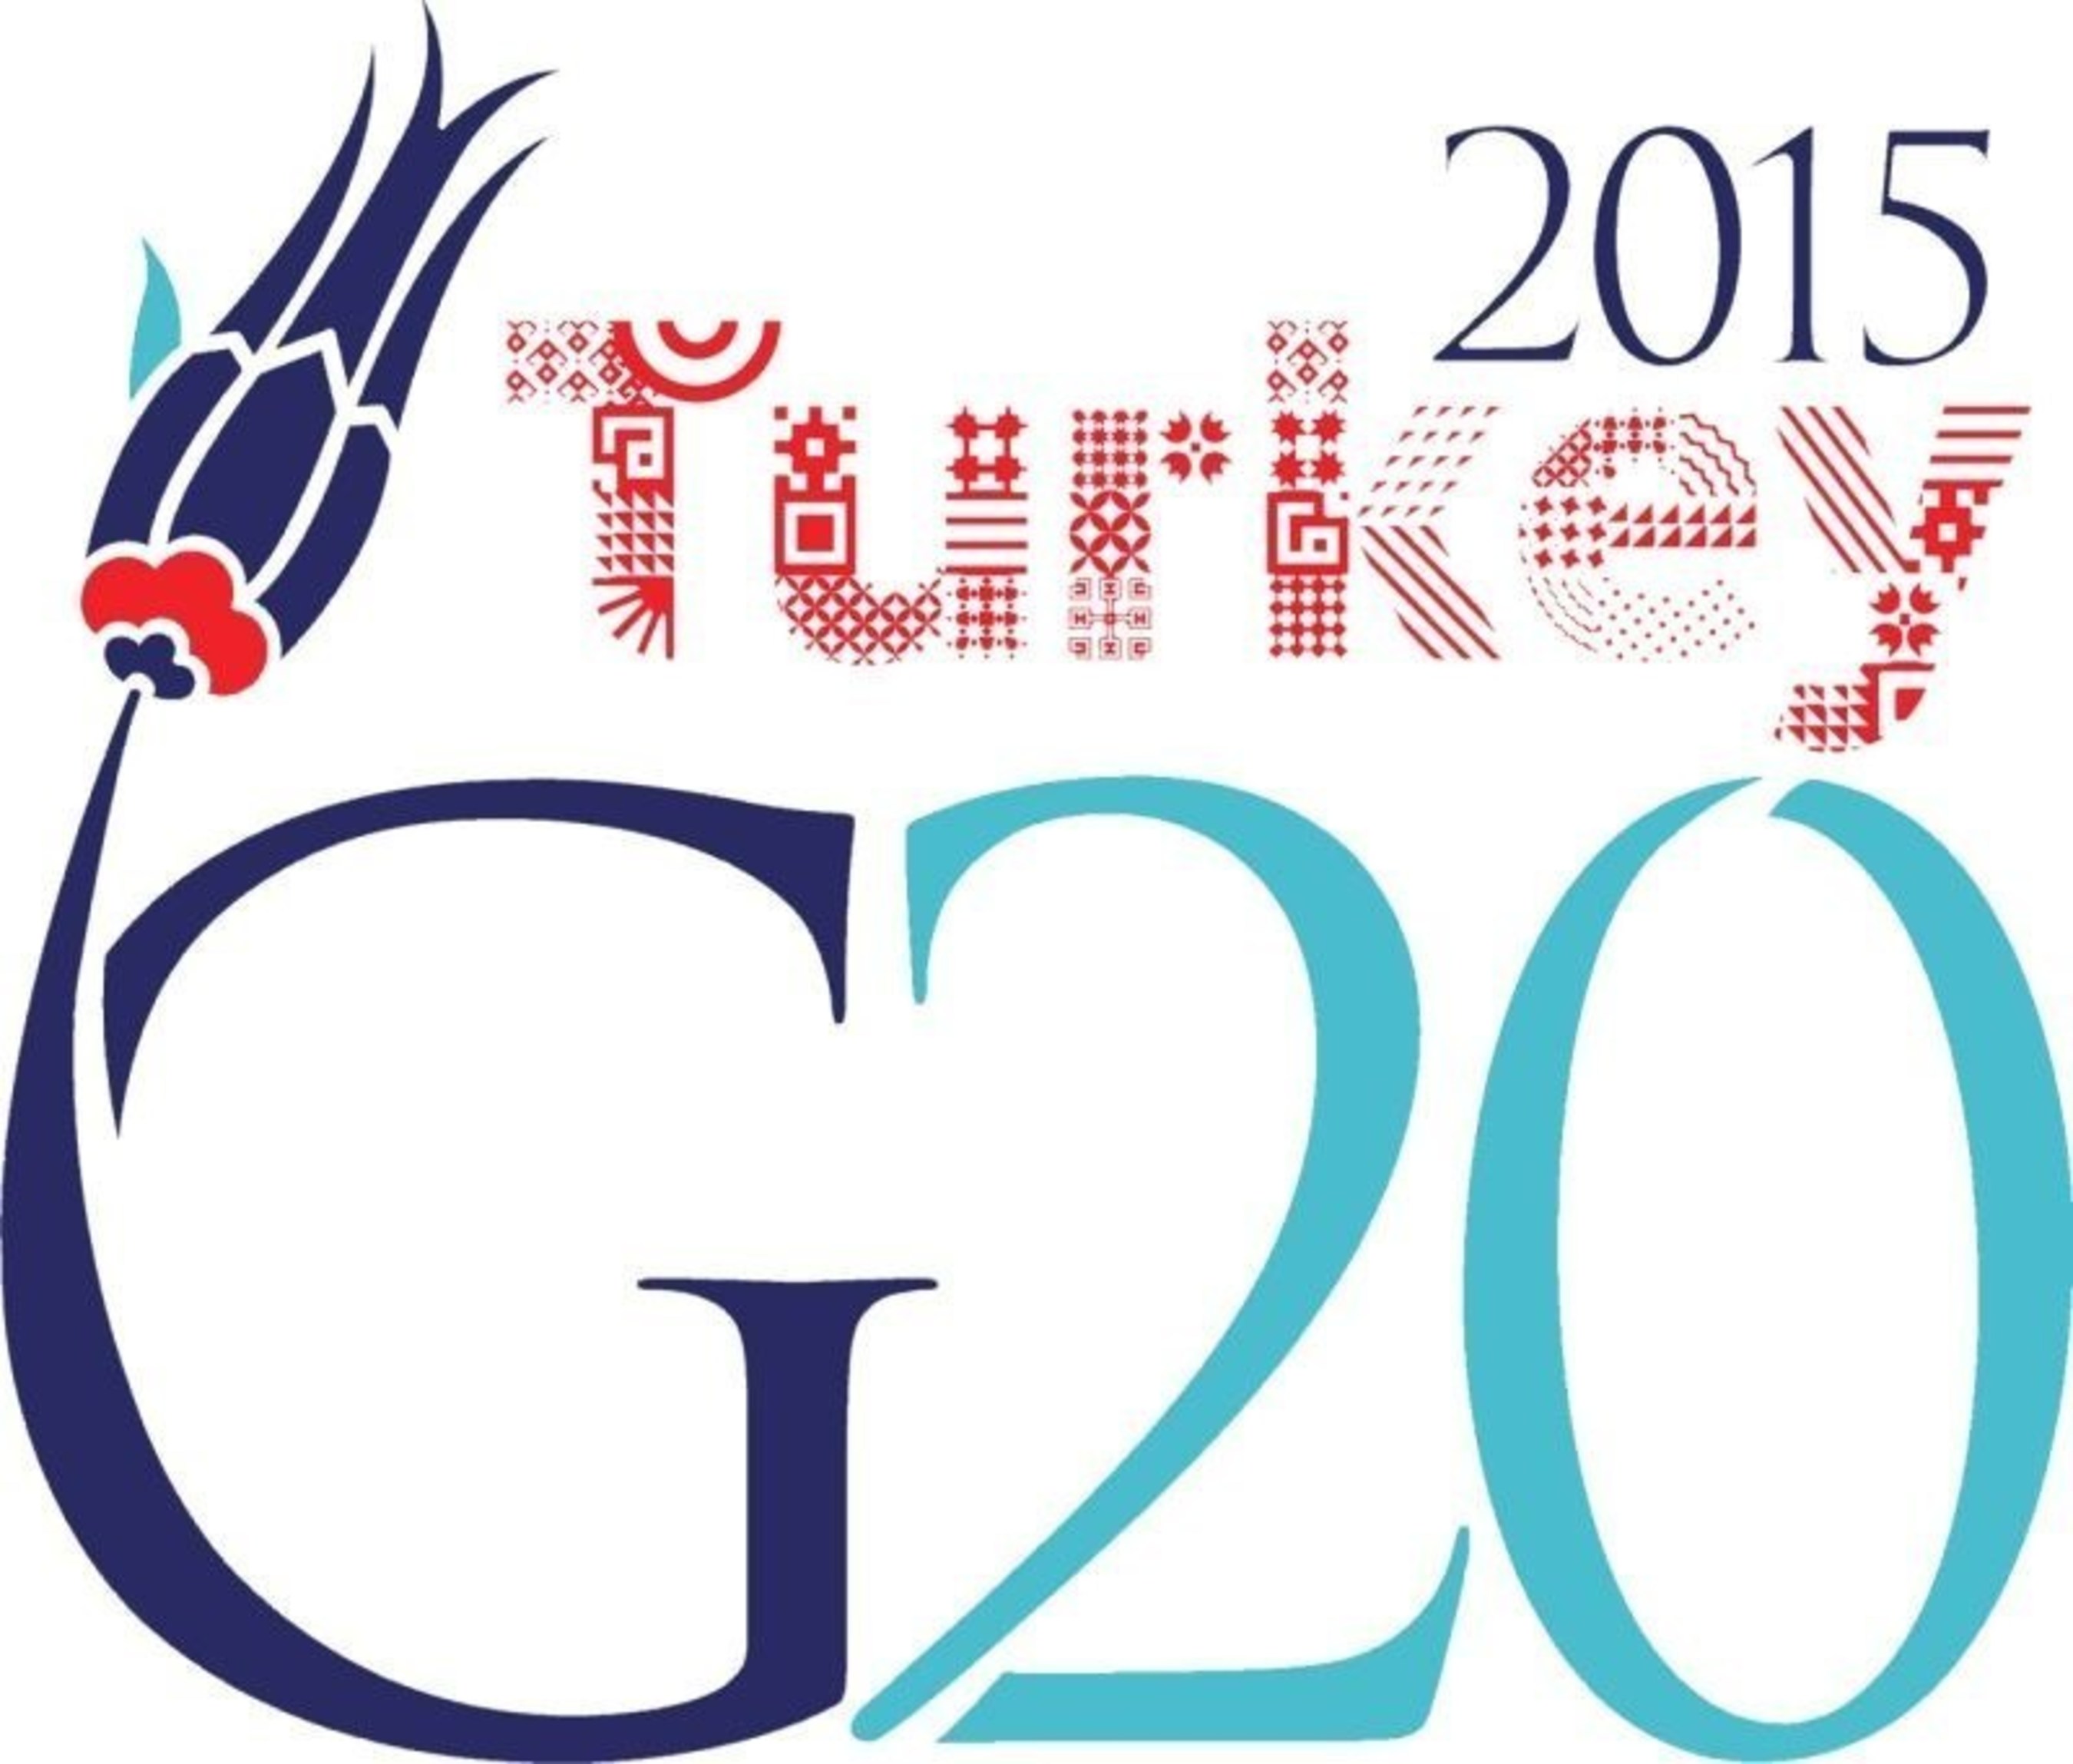 The tenth annual G20 Leaders Summit, a platform which brings together the 20 developed countries of the world, will be held in Antalya between 15-16 November 2015. "G2O in Turkey", the official publication of the summit covering the events, has begun to reach readers from the foremost countries around the globe. Published by the international media company Global Connection (GC) with contributions from worldwide journalists, "G20 in Turkey" has variously described Turkey as the "star of rising markets and the region", "an exemplar of a prospering economy", and "the most dynamic country among the G20". (PRNewsFoto/Global Connection Media S.A.) (PRNewsFoto/Global Connection Media S.A.)